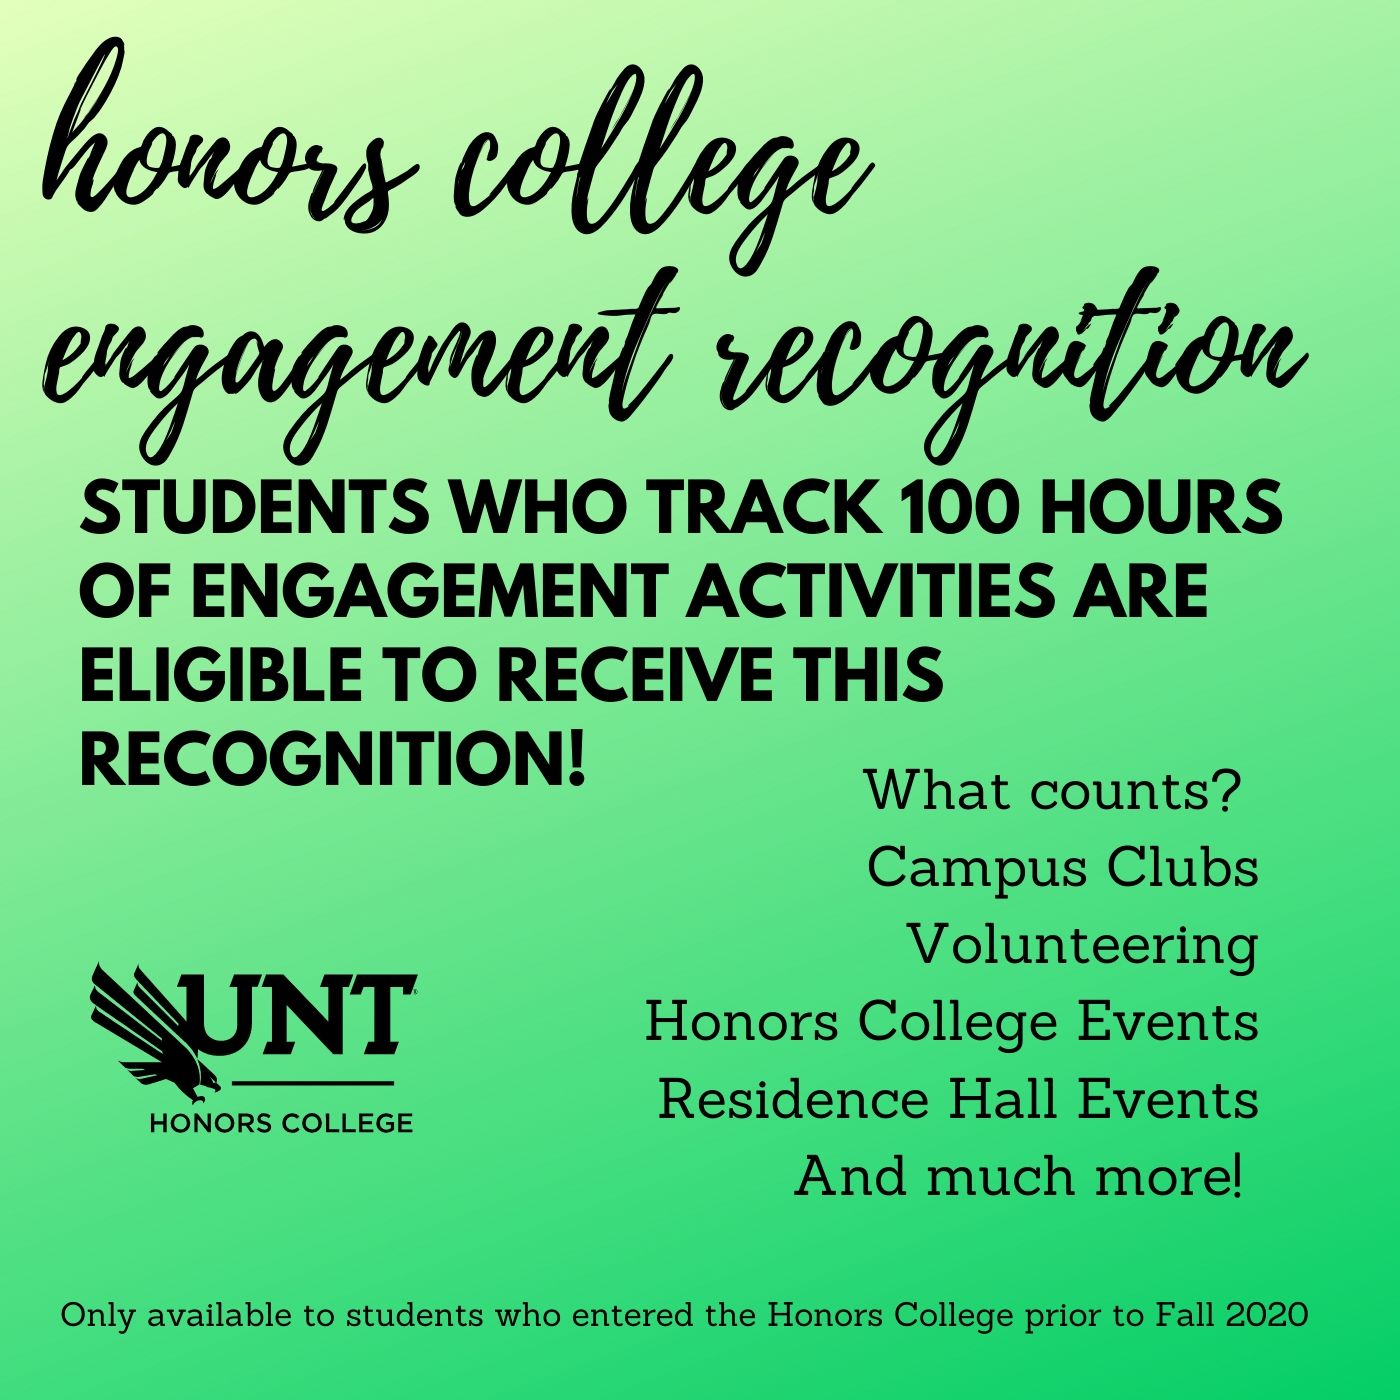 Students who track 100 hours of engagement activities are eligible to receive this recognition.